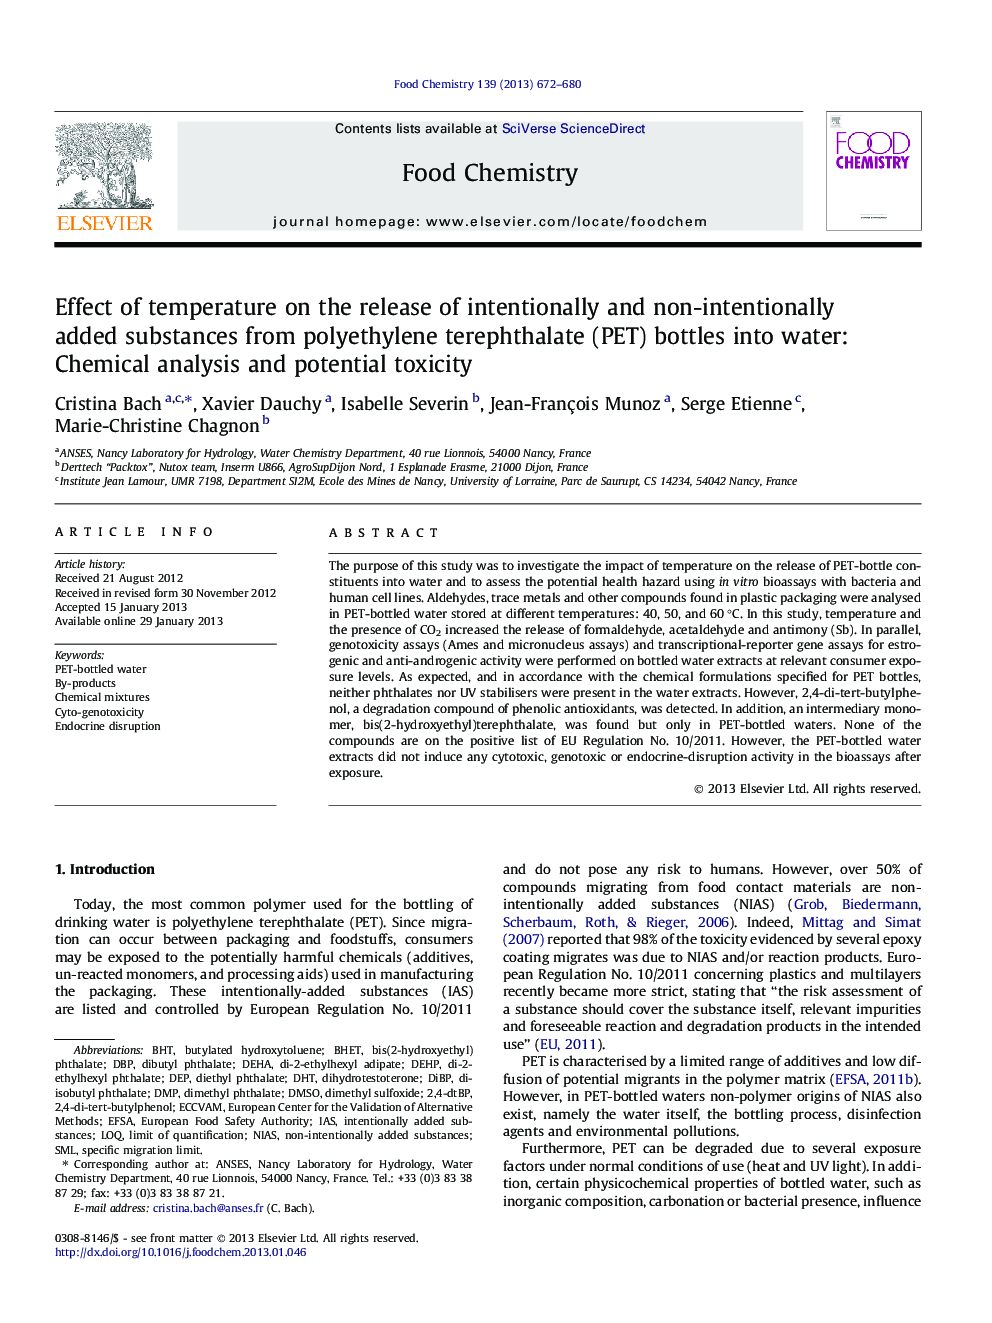 Effect of temperature on the release of intentionally and non-intentionally added substances from polyethylene terephthalate (PET) bottles into water: Chemical analysis and potential toxicity